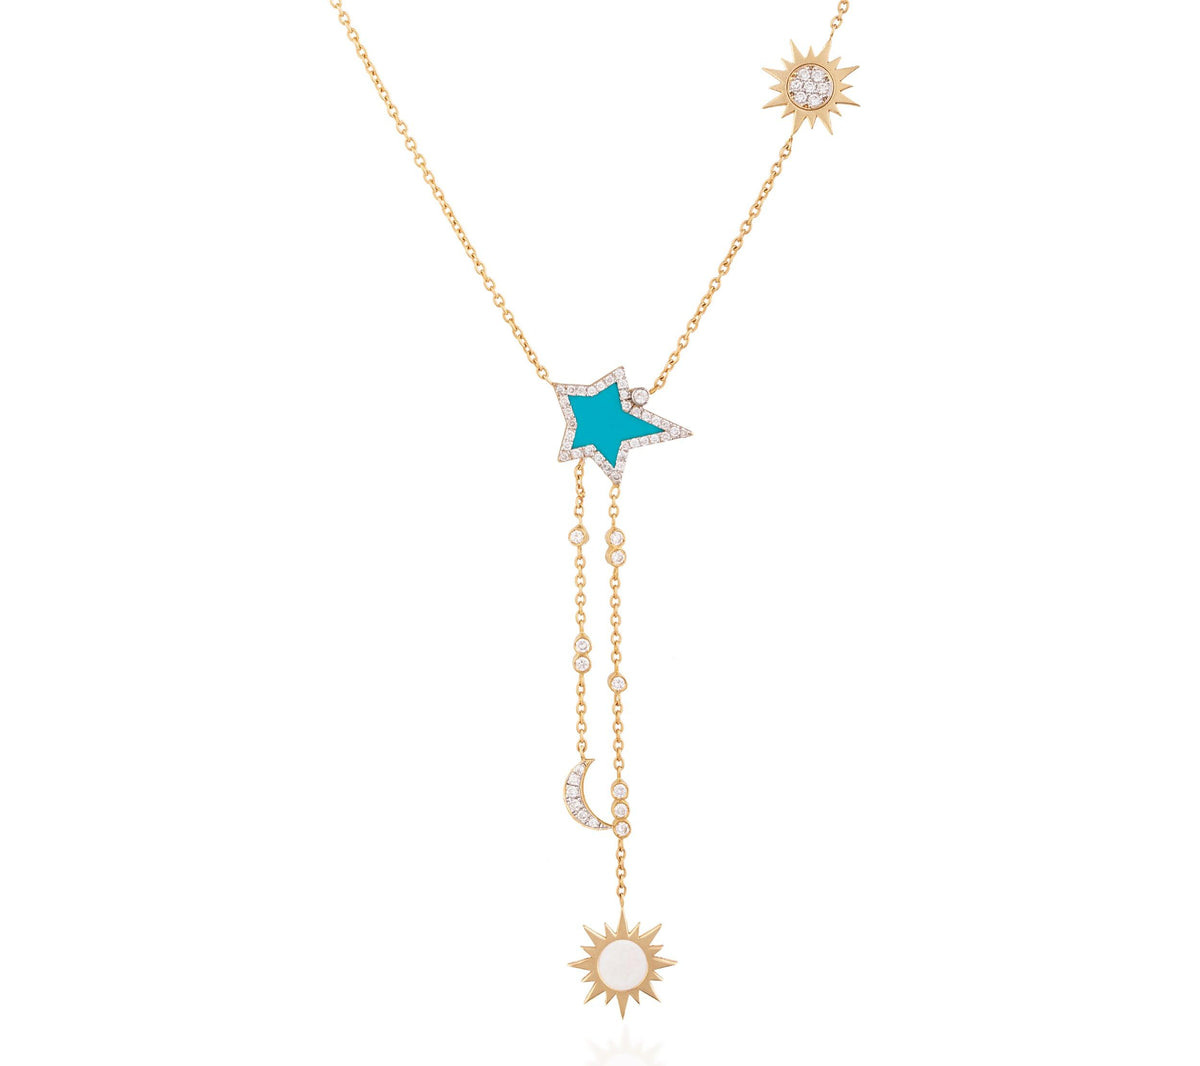 18kt Yellow Gold Bright Star Necklace with Enamel and Diamonds - Tales of Stones